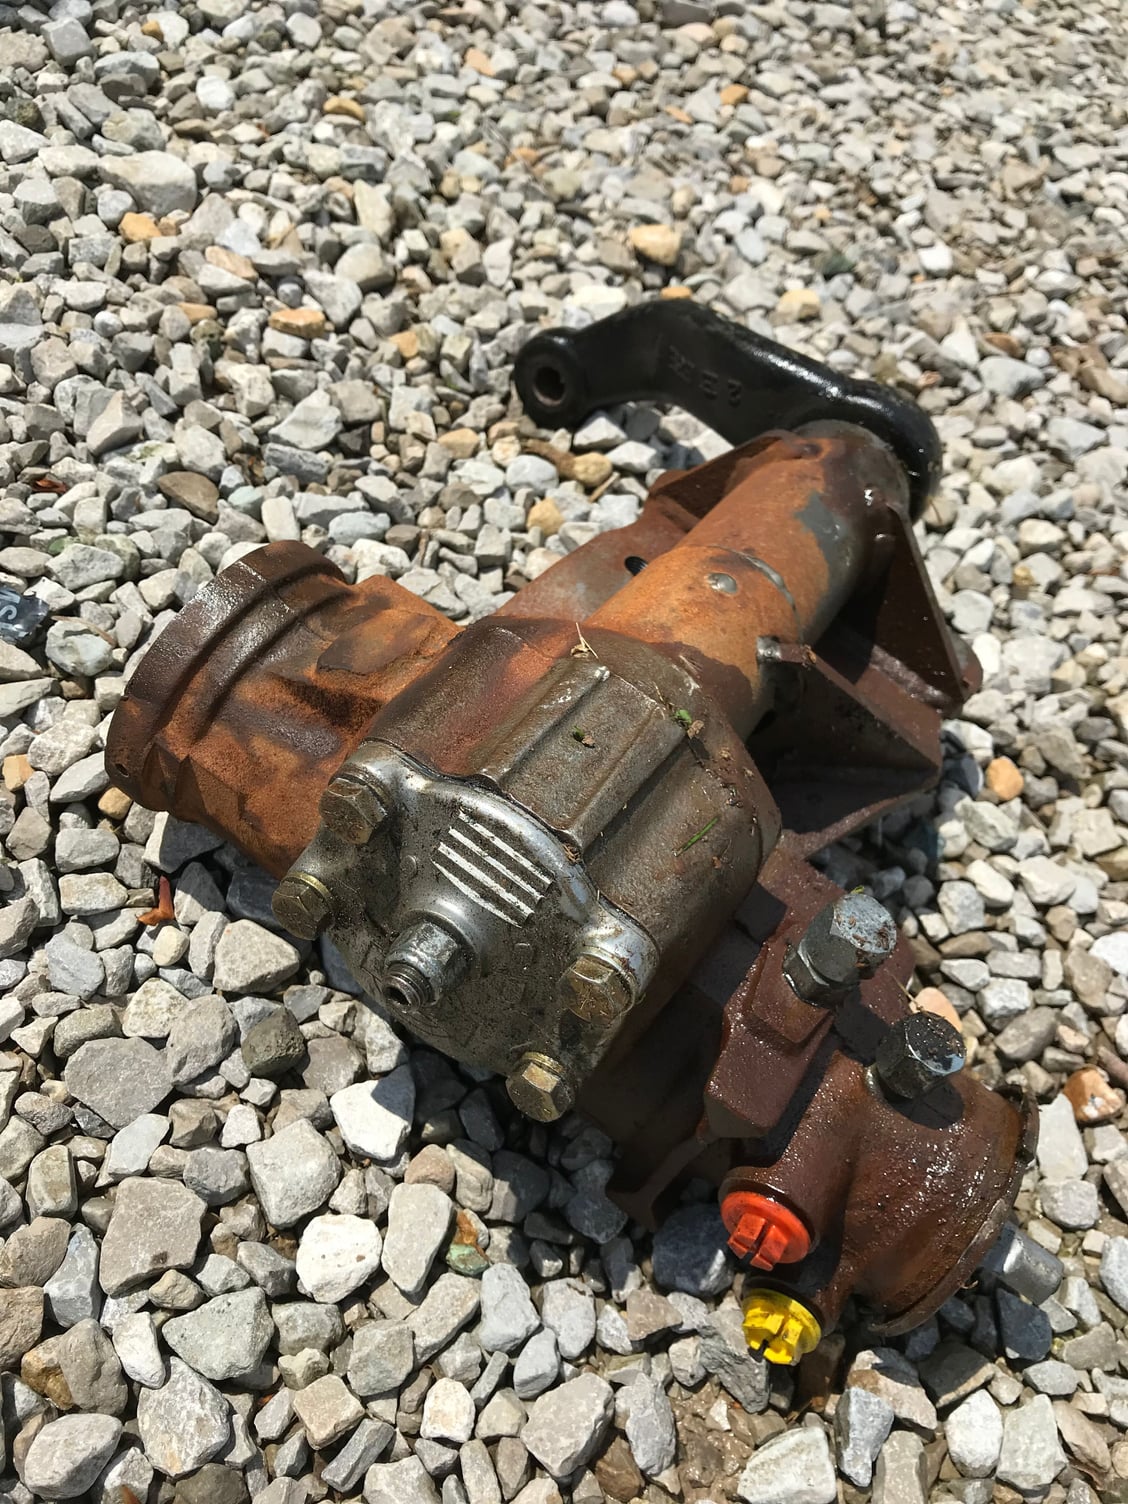 Steering/Suspension - Two steering gear box for sell - Used - 2007 to 2017 Jeep Wrangler - Newport, OH 45768, United States